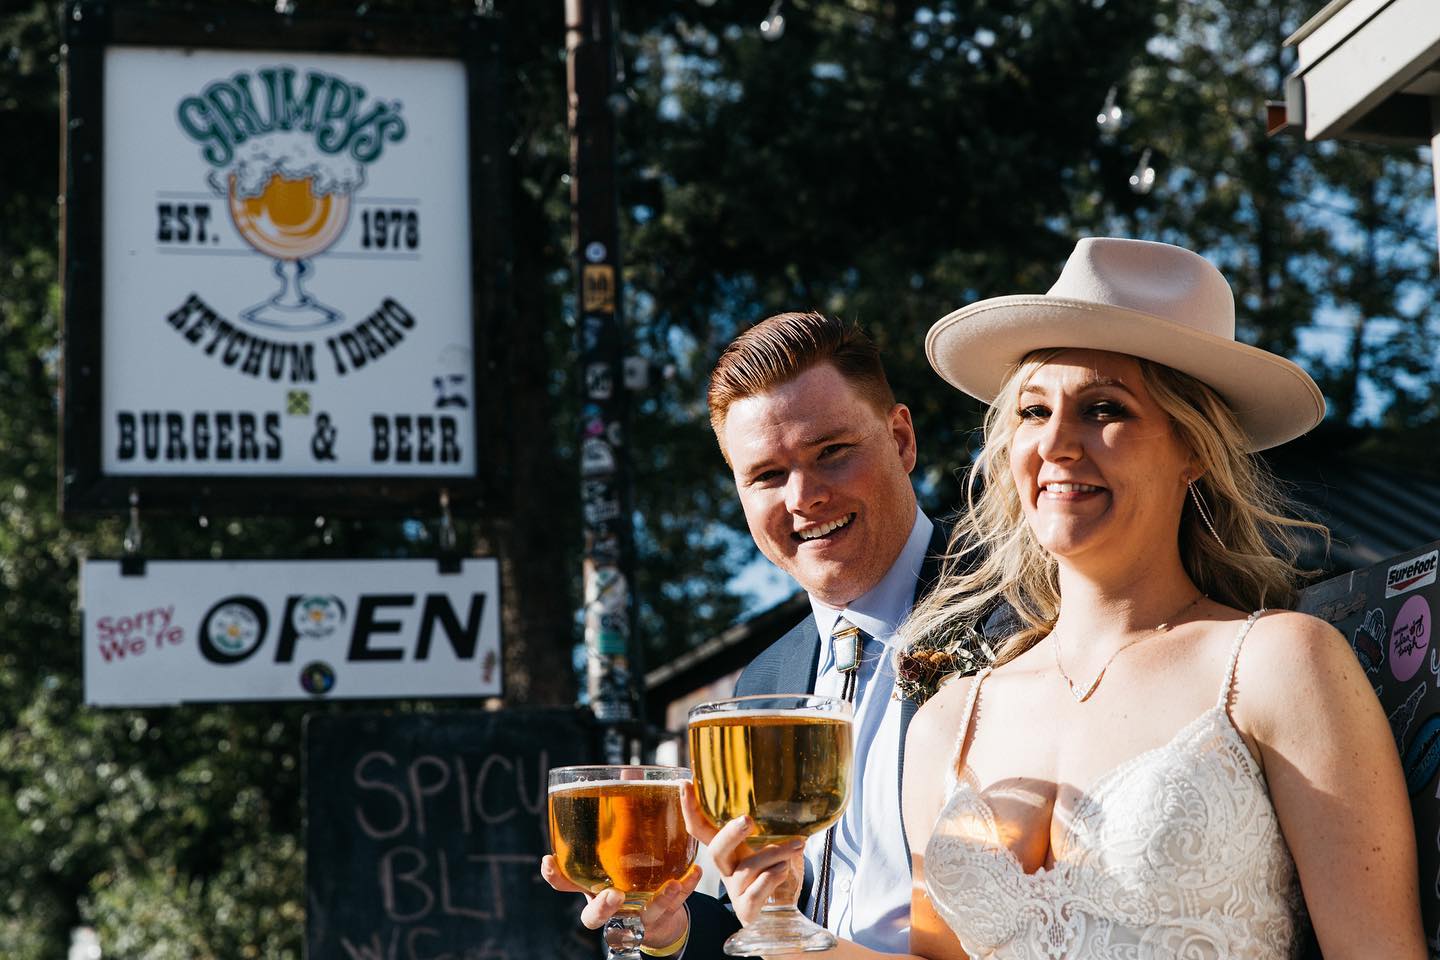 Planning on a wedding in Sun Valley is like no other place. SVPN Magazine’s second annual wedding guide has all the inside info and then some for a memorable experience. Read more in the June 2022 issue of SVPN Magazine—it’s a keeper. Photo by Ray J. Gadd @svpnmagazine @rayjgadd @theoriginalgrumpys #svpnmagazine #rayjgadd #grumpyssunvalley #sunvalleyweddings #sunvalleyidaho #sunvalleylife #sunvalleymemories